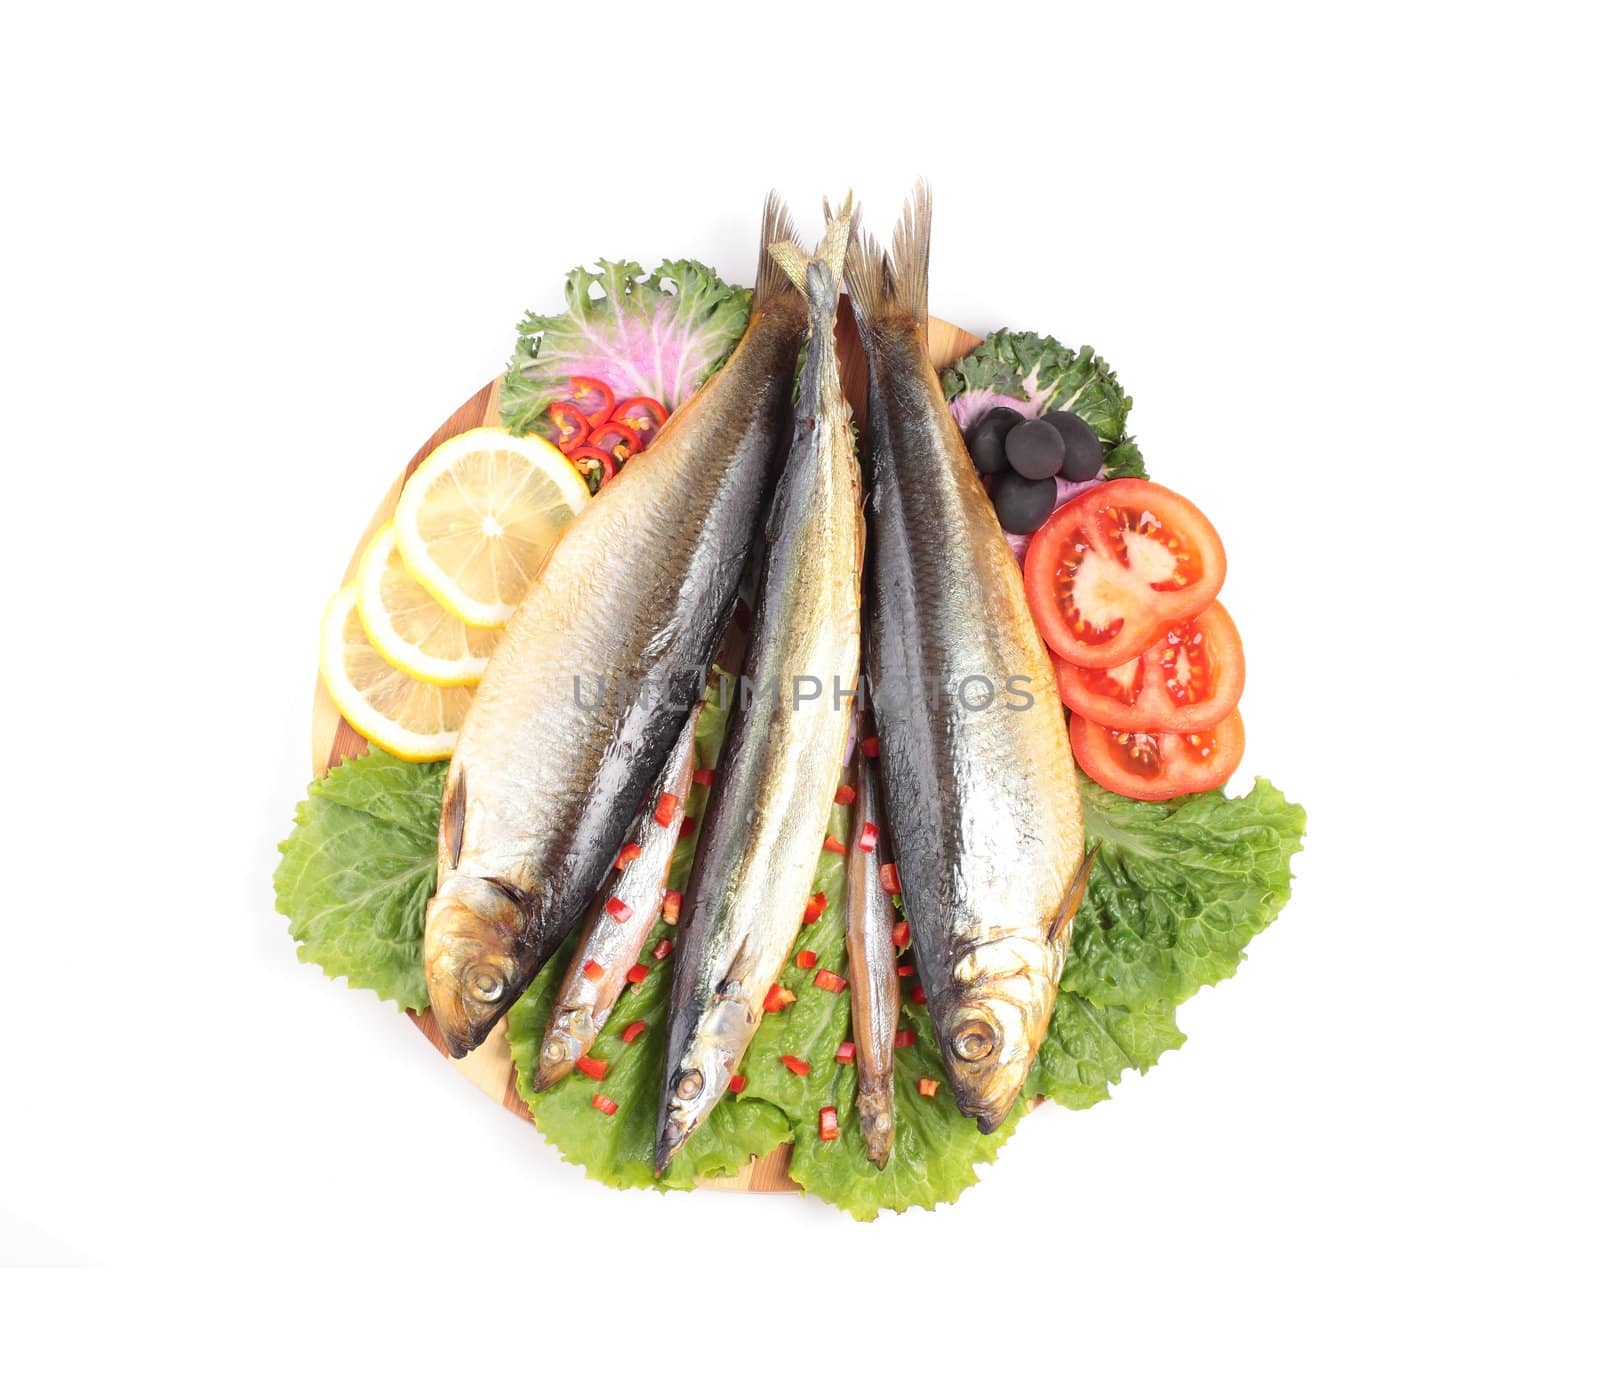 pickled herring with tomato rings isolated on white